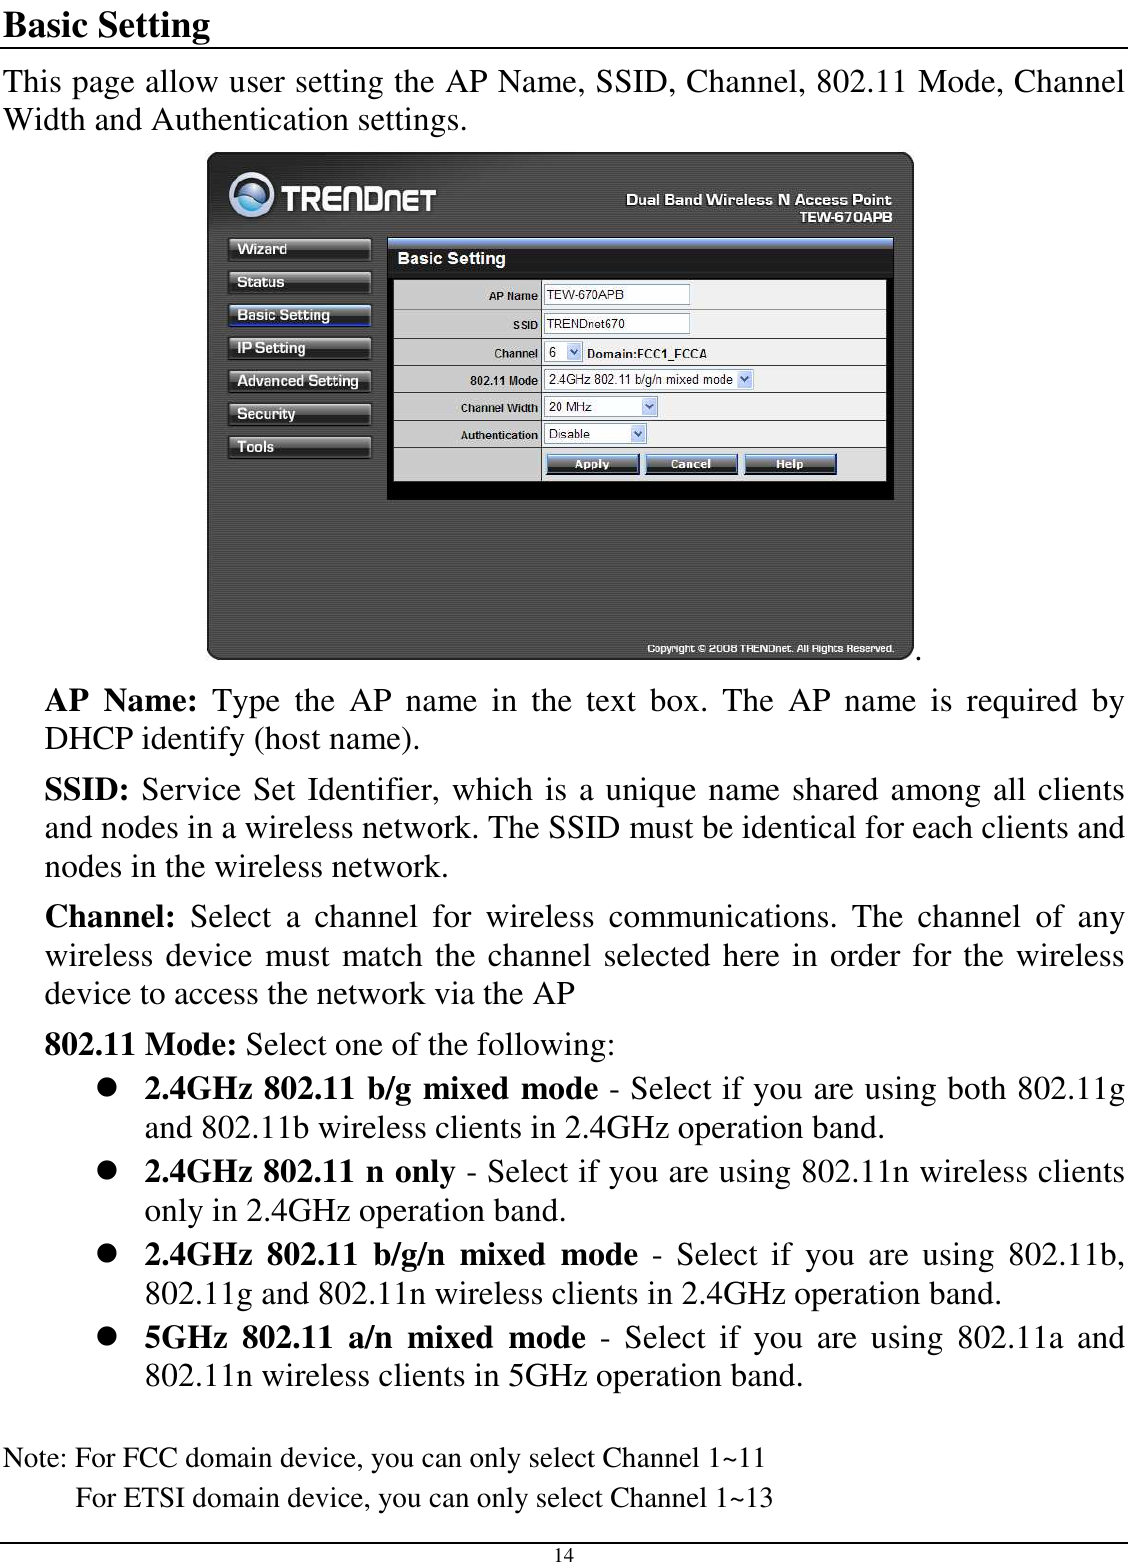  14 Basic Setting This page allow user setting the AP Name, SSID, Channel, 802.11 Mode, Channel Width and Authentication settings. . AP  Name:  Type  the  AP  name  in  the  text  box.  The  AP  name  is  required  by DHCP identify (host name). SSID: Service Set Identifier, which is a unique name shared among all clients and nodes in a wireless network. The SSID must be identical for each clients and nodes in the wireless network. Channel:  Select  a  channel  for  wireless  communications.  The  channel  of  any wireless device must match the channel selected here in order for the wireless device to access the network via the AP 802.11 Mode: Select one of the following:  2.4GHz 802.11 b/g mixed mode - Select if you are using both 802.11g and 802.11b wireless clients in 2.4GHz operation band.  2.4GHz 802.11 n only - Select if you are using 802.11n wireless clients only in 2.4GHz operation band.  2.4GHz  802.11  b/g/n  mixed  mode  -  Select if  you are  using 802.11b, 802.11g and 802.11n wireless clients in 2.4GHz operation band.  5GHz  802.11  a/n  mixed  mode  -  Select  if  you  are  using  802.11a  and 802.11n wireless clients in 5GHz operation band.  Note: For FCC domain device, you can only select Channel 1~11           For ETSI domain device, you can only select Channel 1~13 